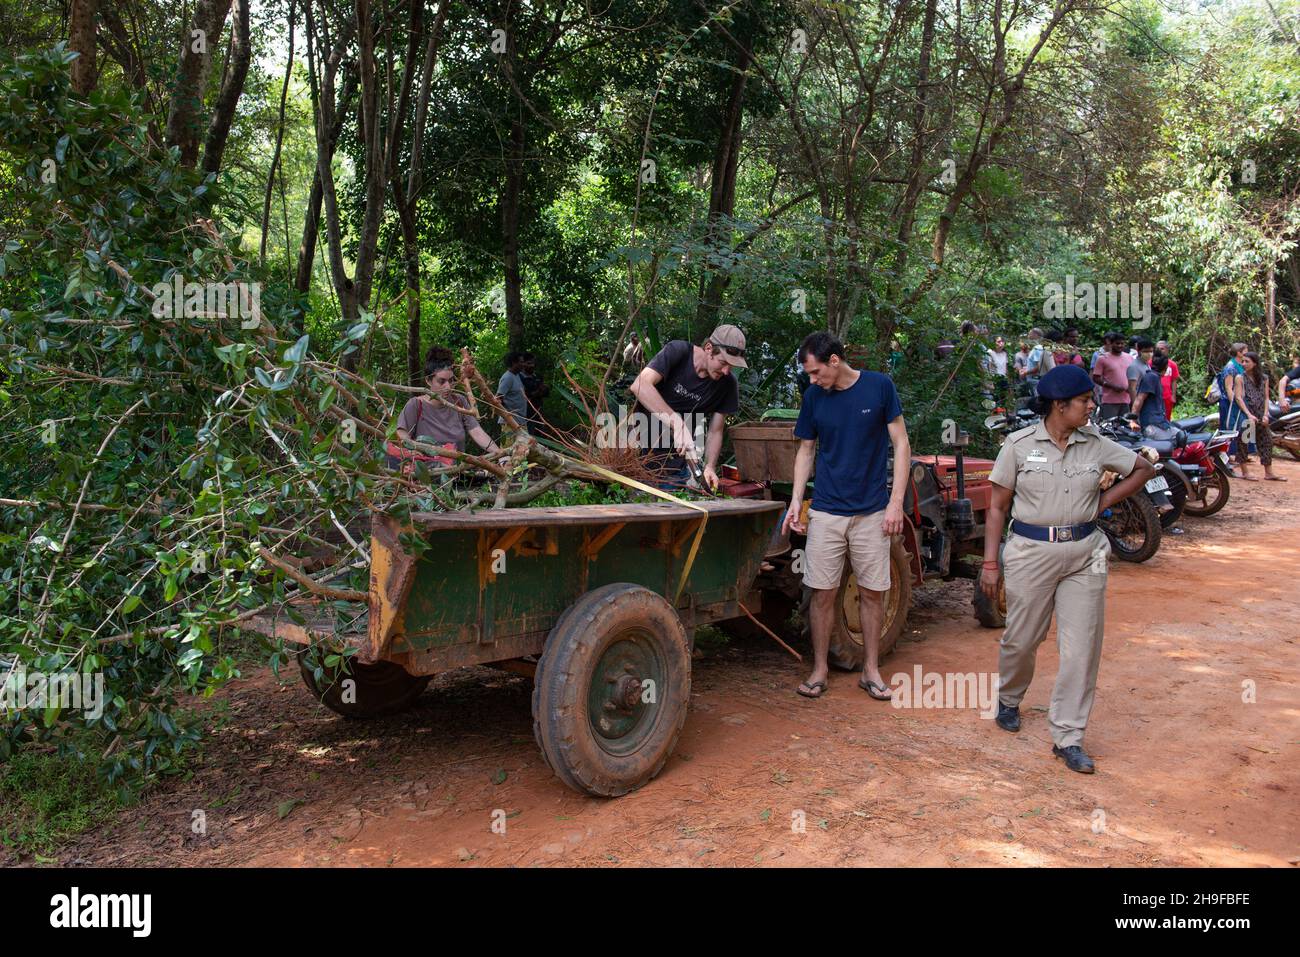 Auroville, India - 4th December 2021: Trying to save a tree just cutted by the intervention of the excavators that appeared in the Bliss forest, prote Stock Photo